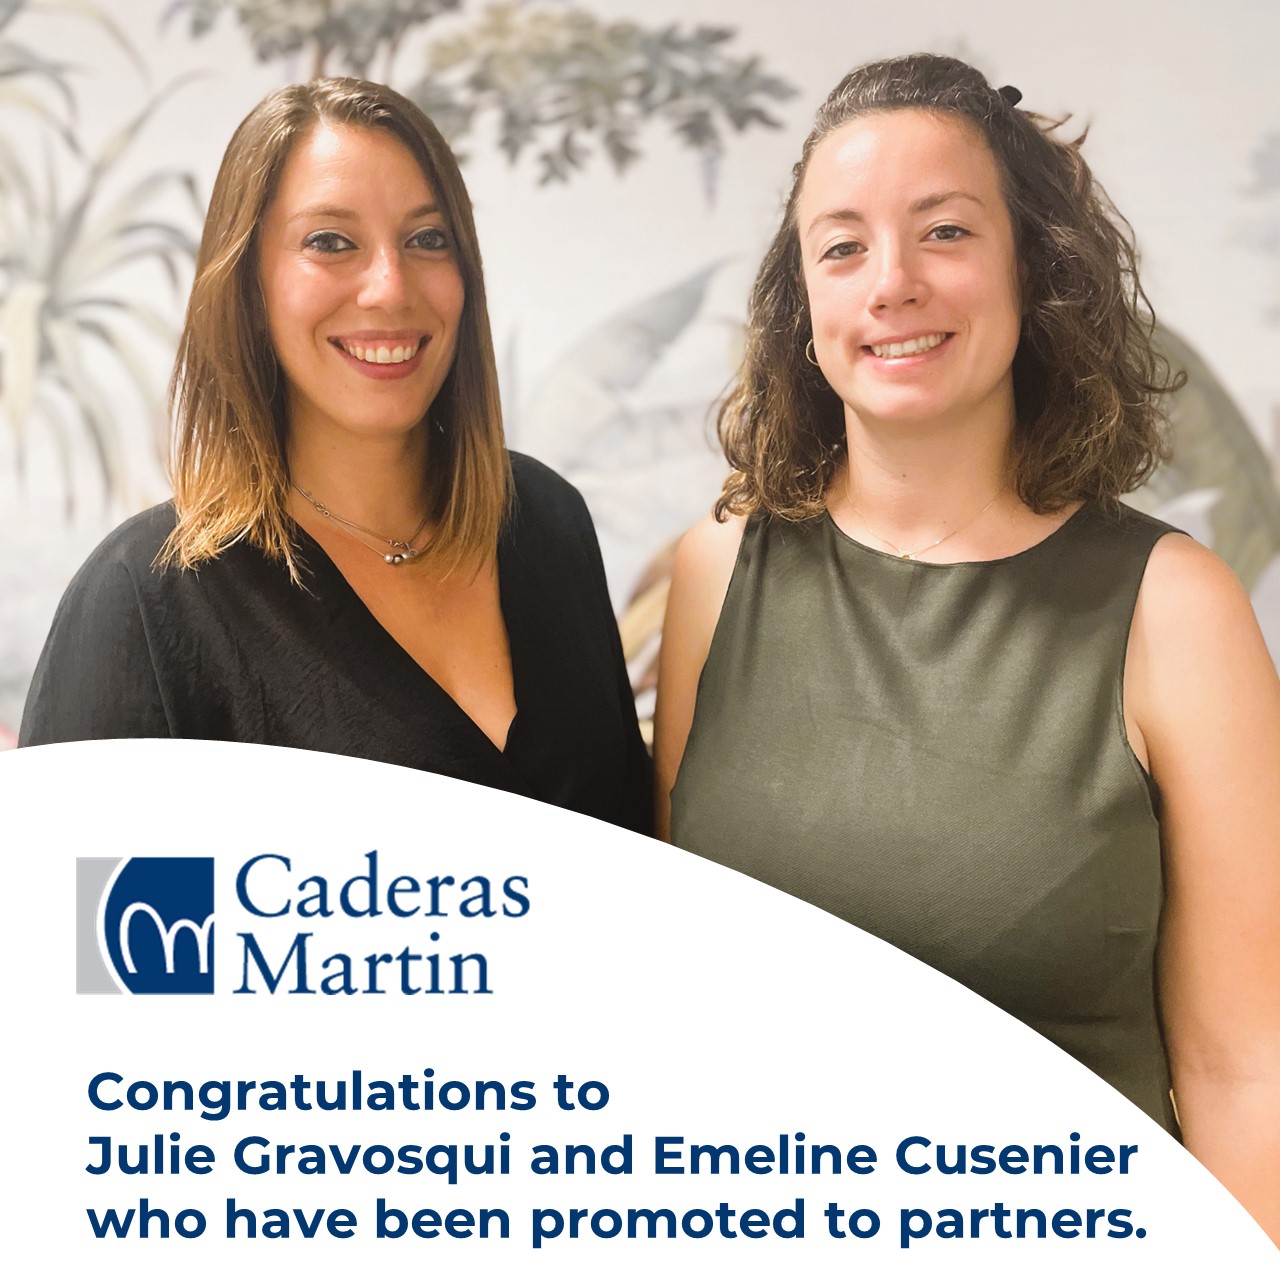 Caderas Martin co-opts two new partners